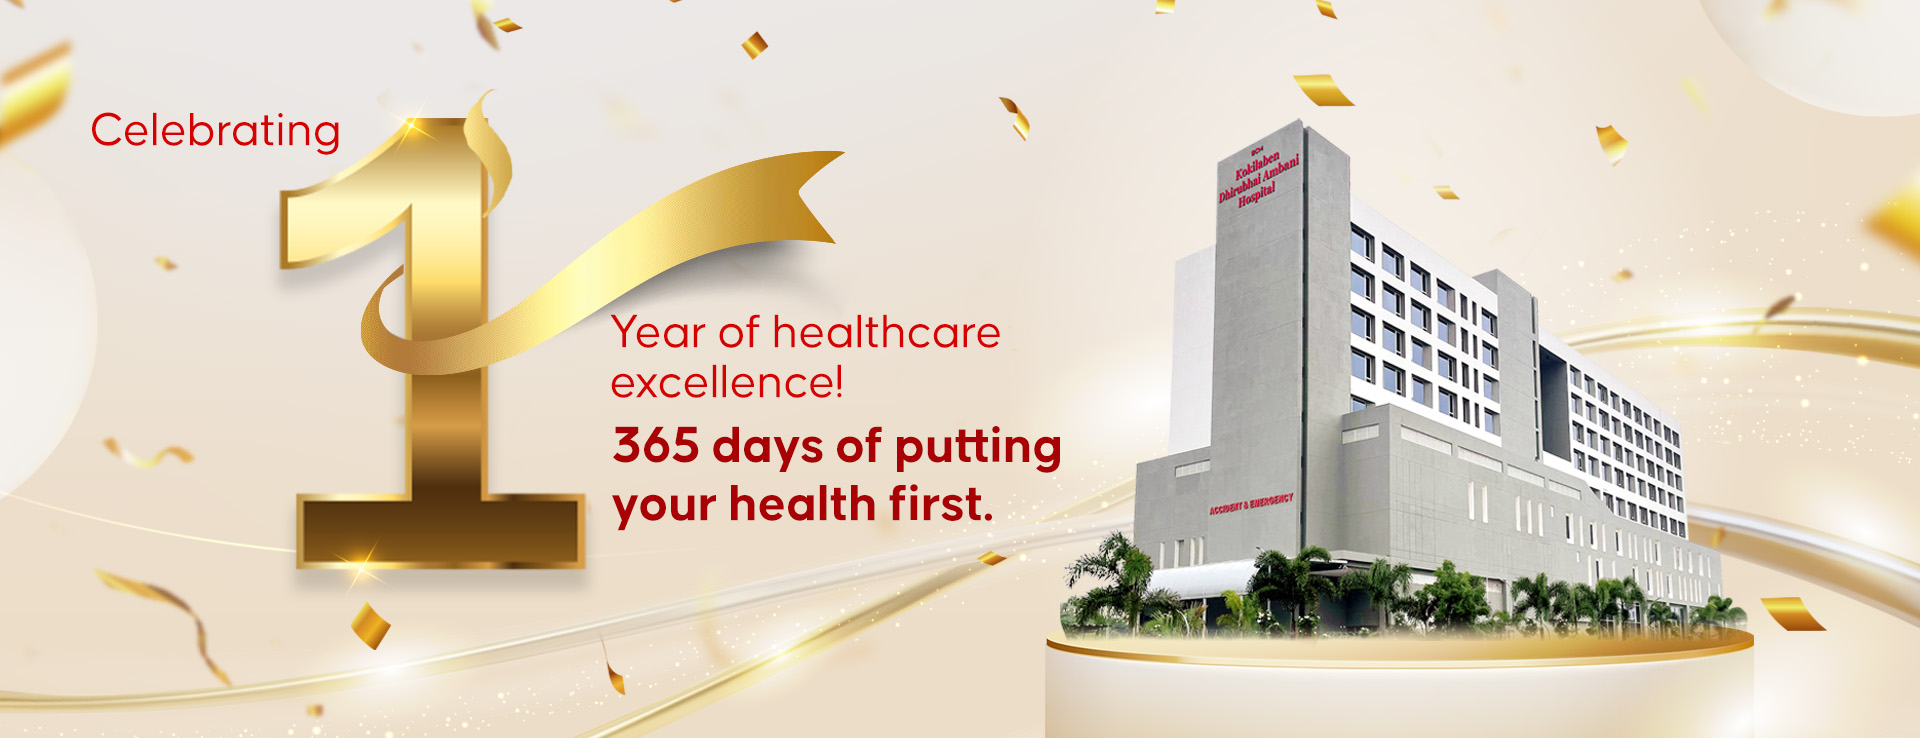 Celebrating a year of healthcare excellence at best Multispecialty Hospital in Indore